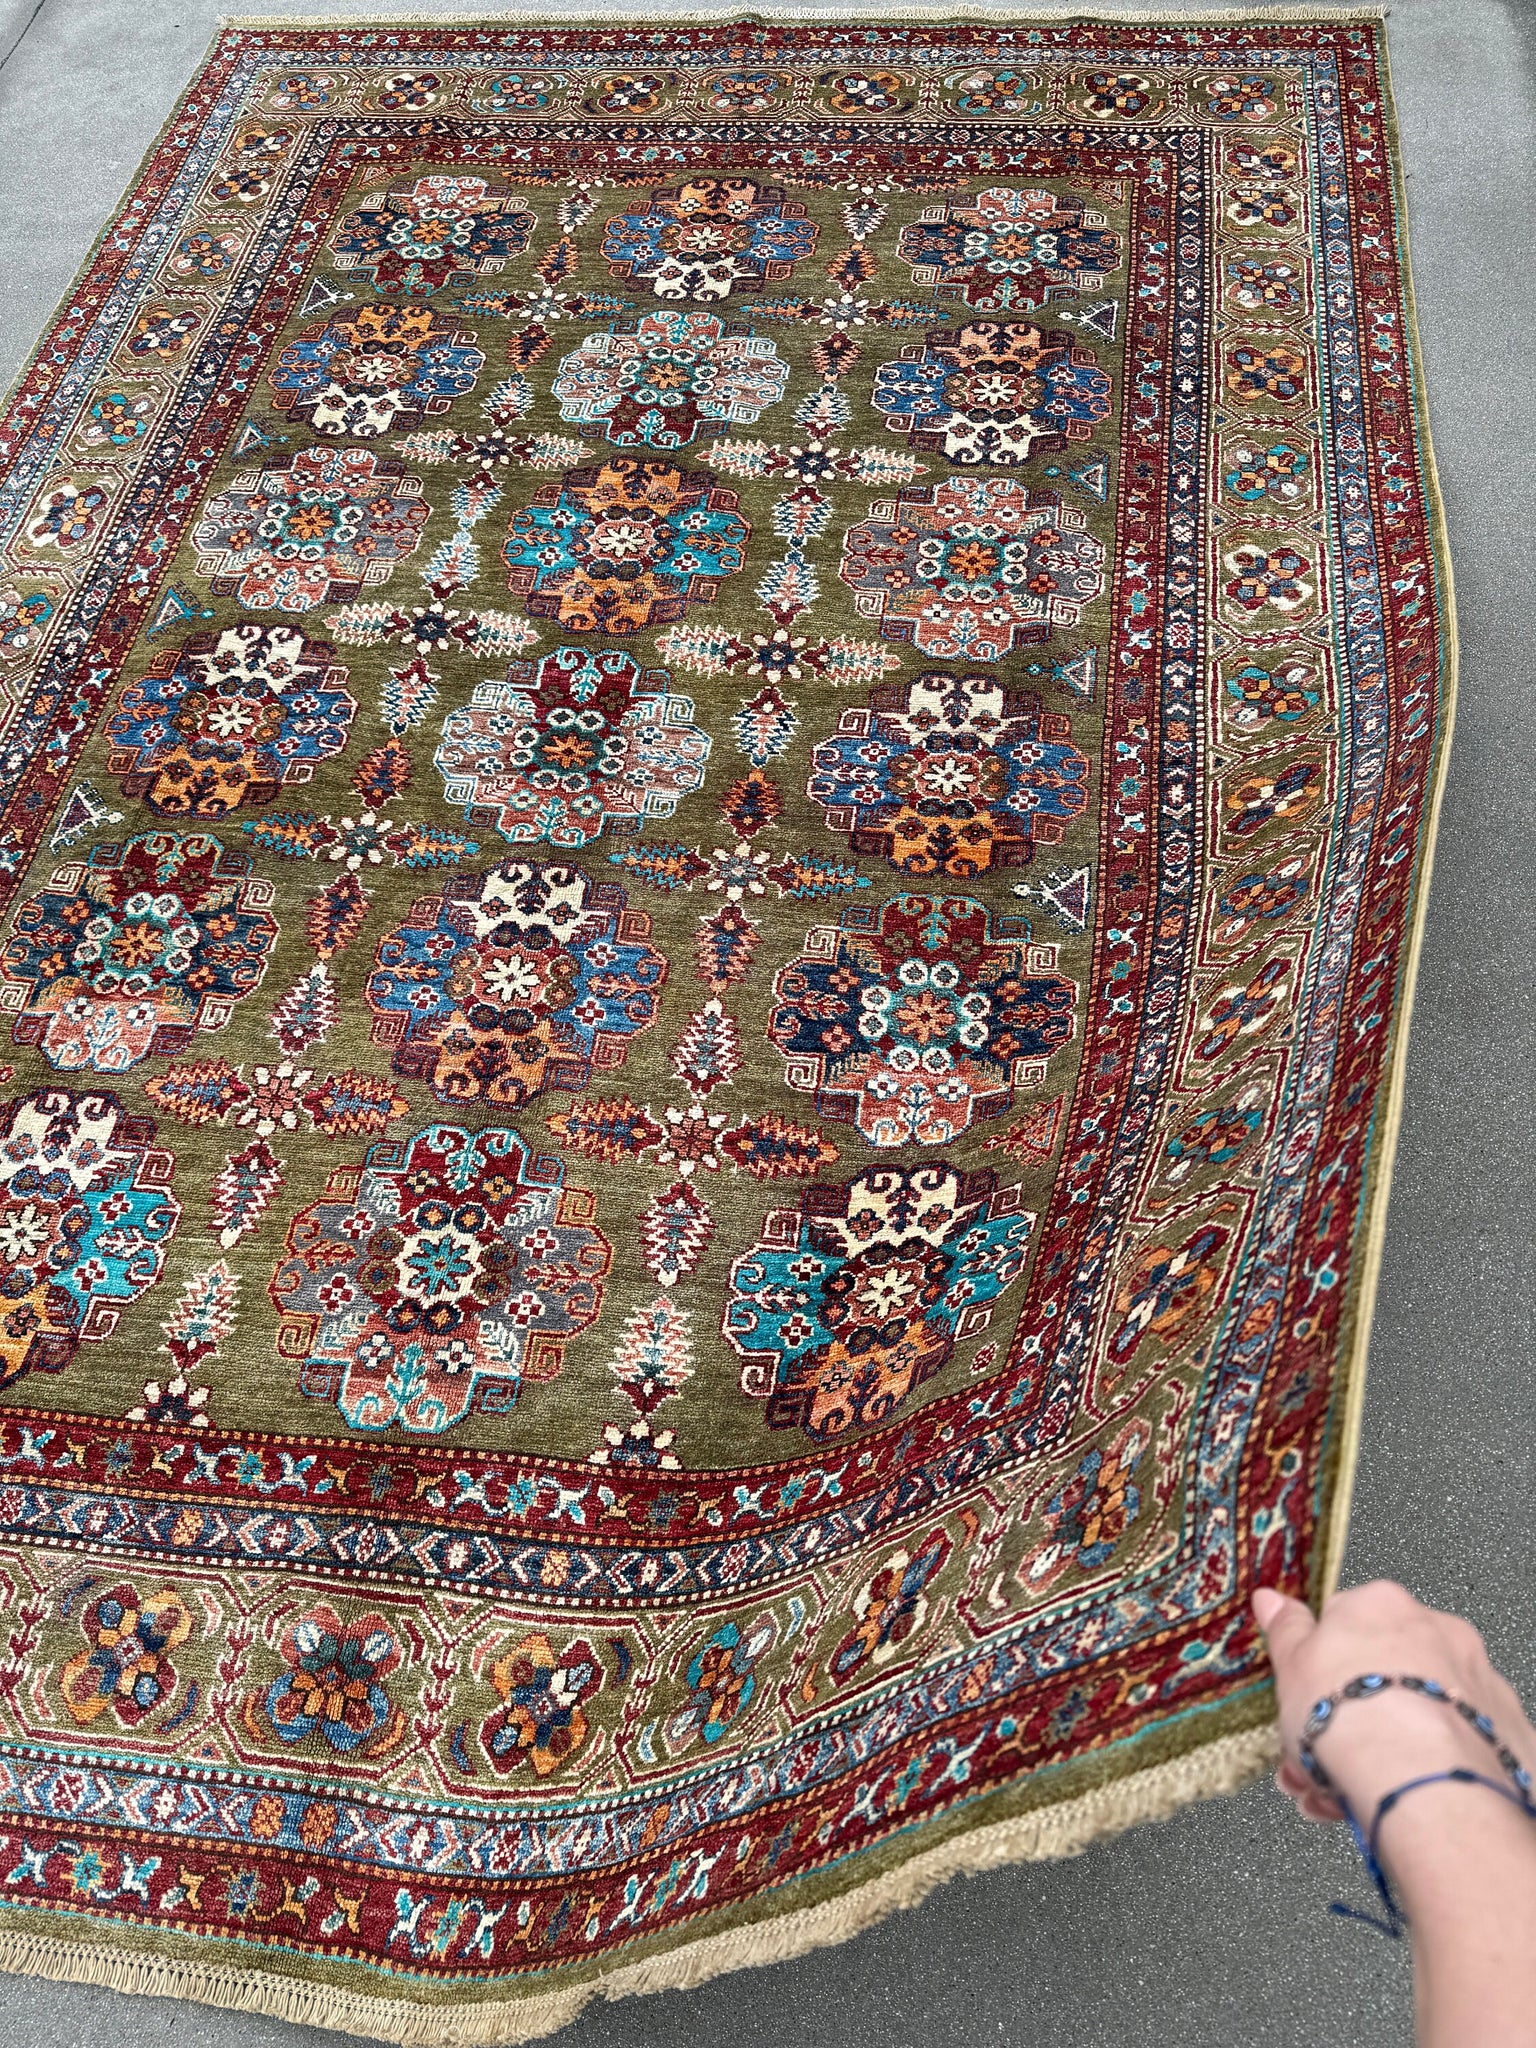 All Rugs - The Rug Mine - Free Shipping - Authentic Oriental Rugs